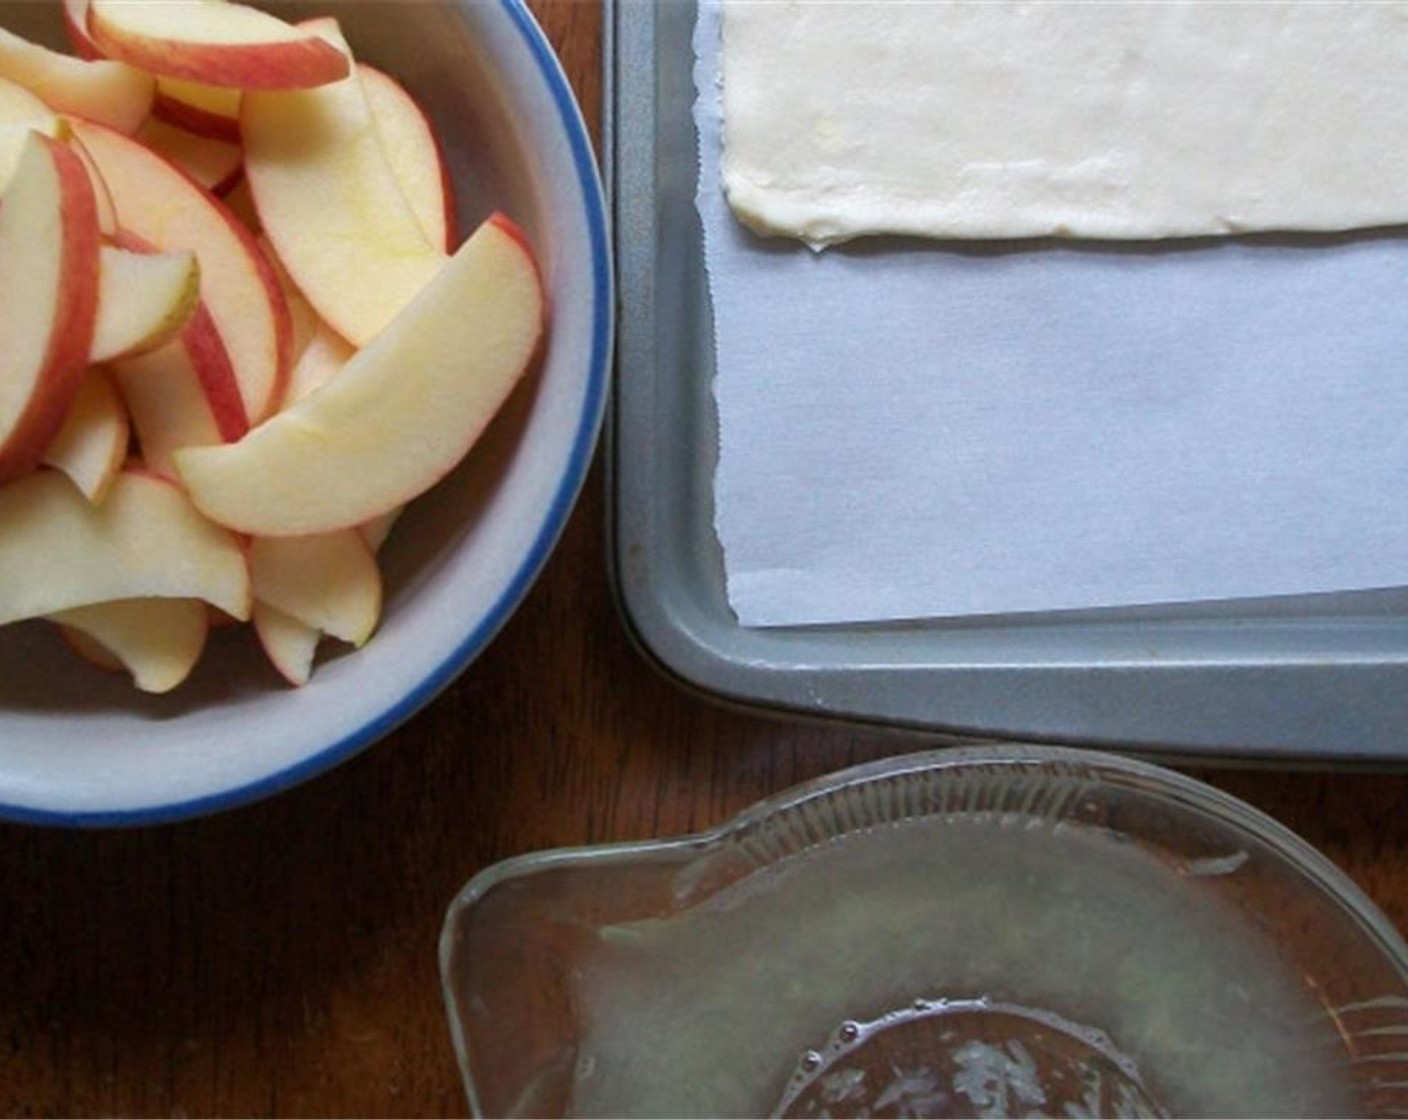 step 1 Toss Red Apples (2) in juice from Lemon (1) and mix with half of the Brown Sugar (1/2 cup), Salt (1 pinch) and Ground Cinnamon (1 tsp). Let sit for 15 minutes before placing on puff pastry (1 pckg).